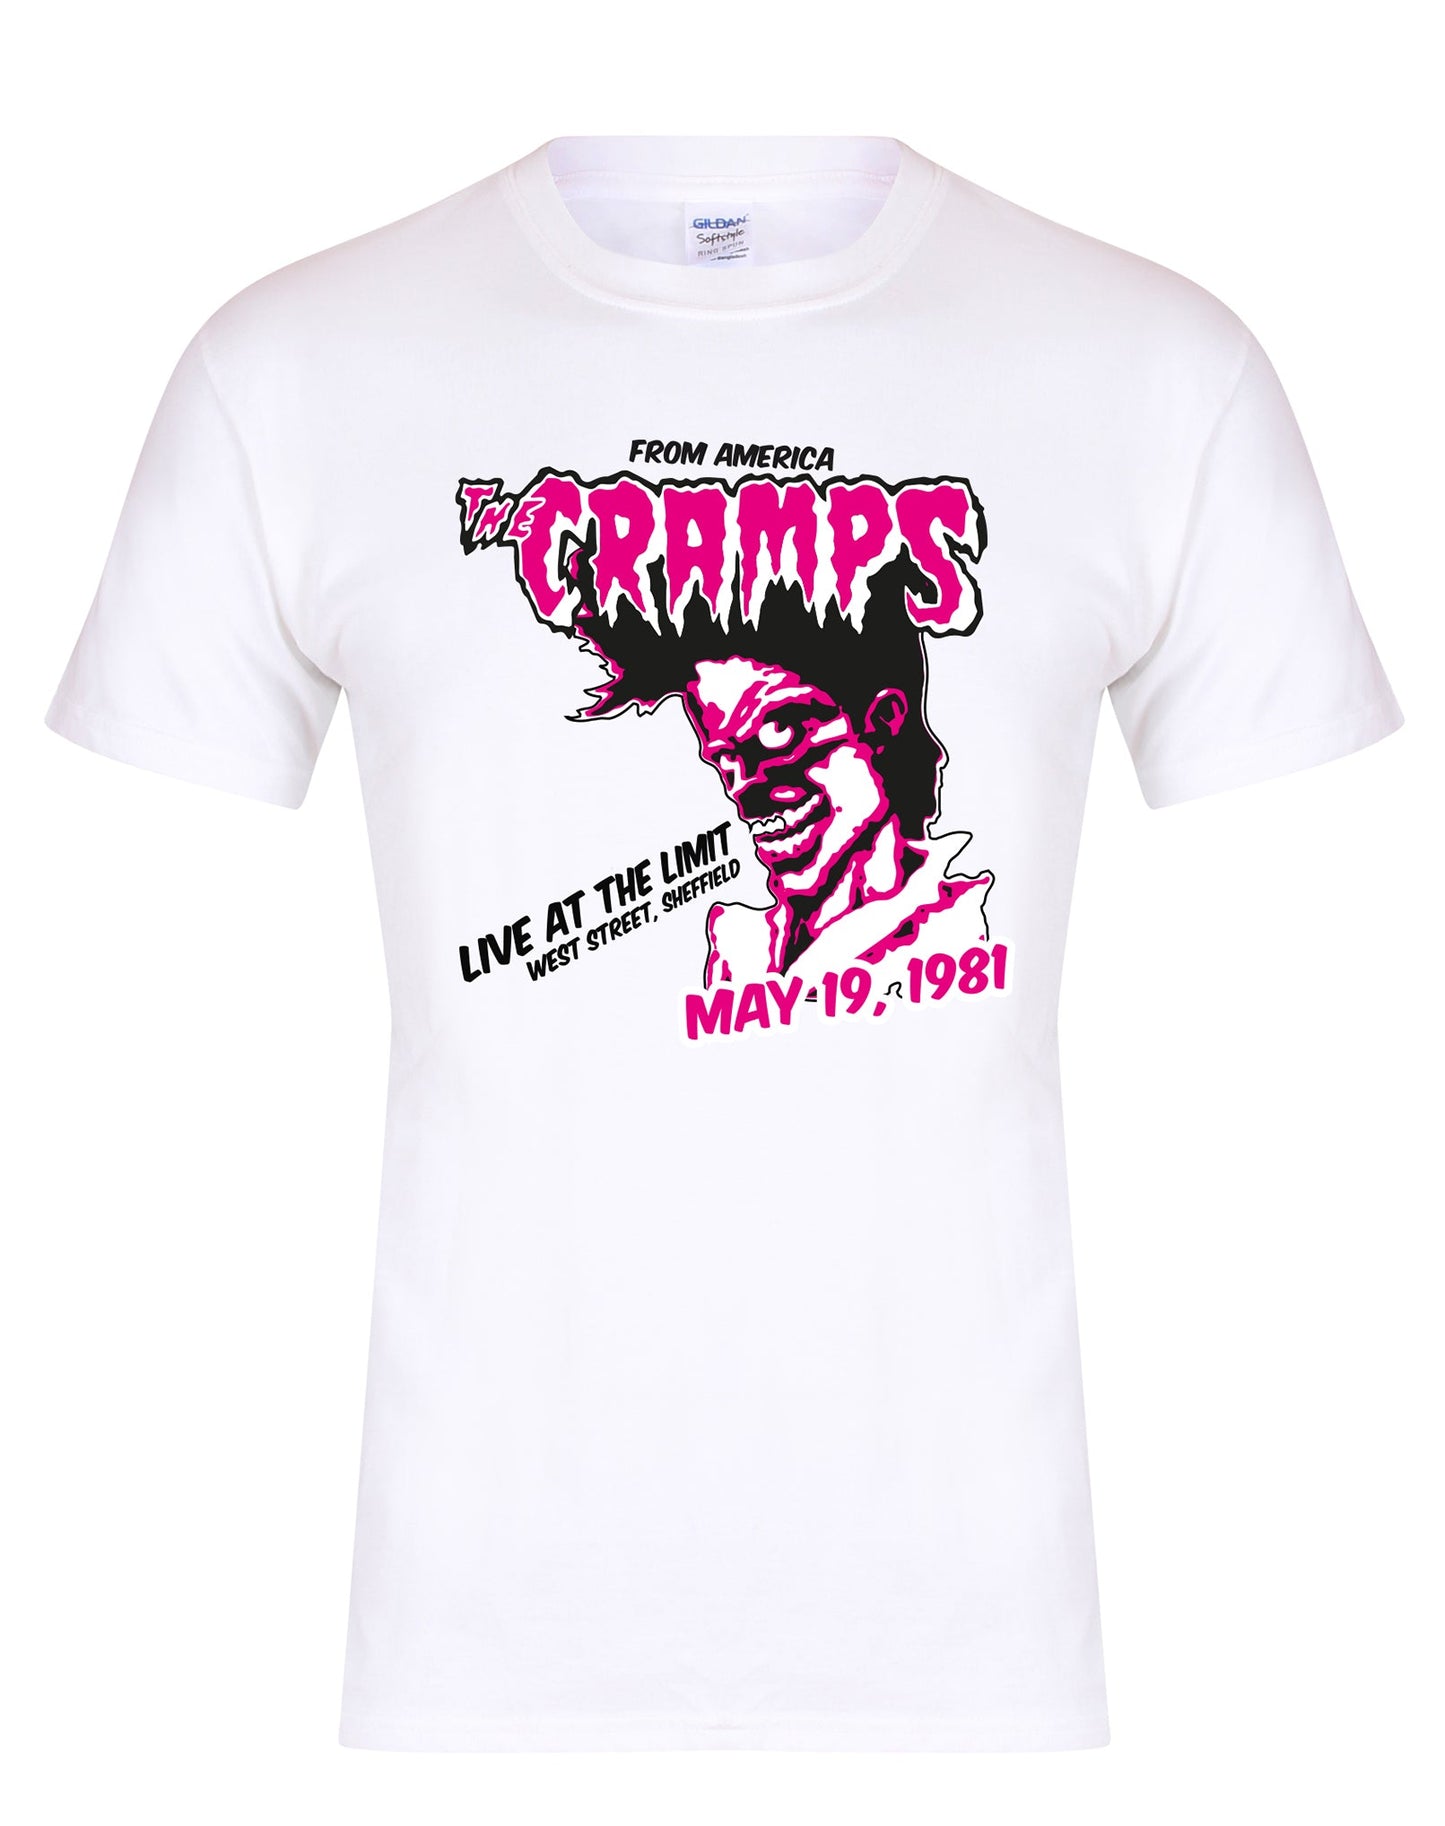 The Cramps at the Limit - unisex fit T-shirt - various colours - Dirty Stop Outs